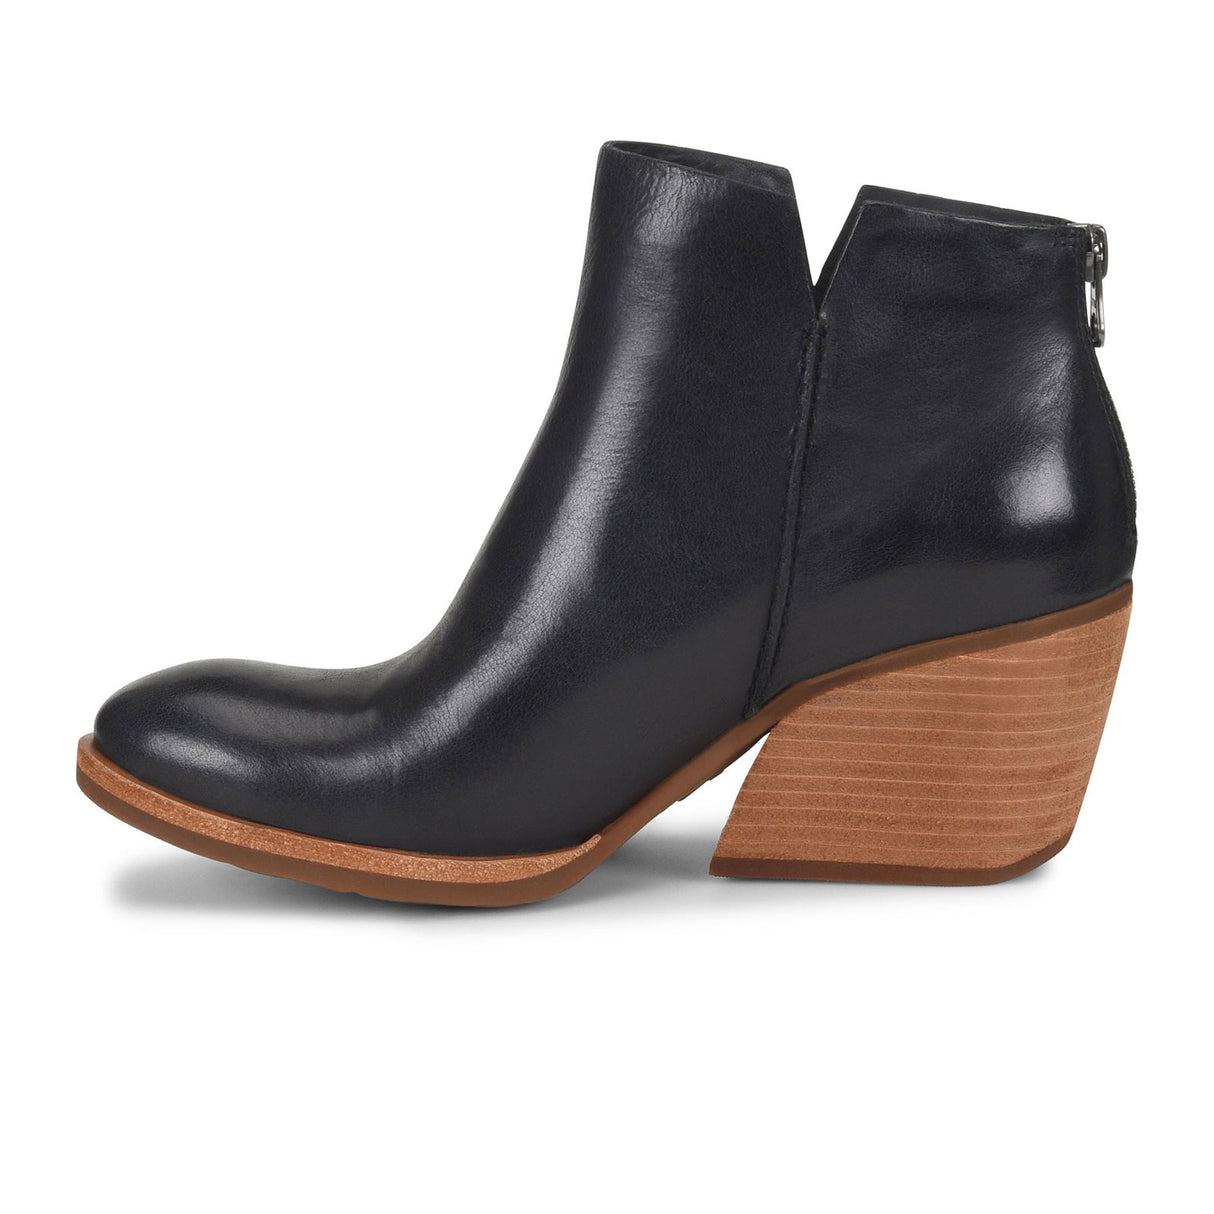 Kork-Ease Chandra Ankle Boot (Women) - Black Boots - Fashion - The Heel Shoe Fitters